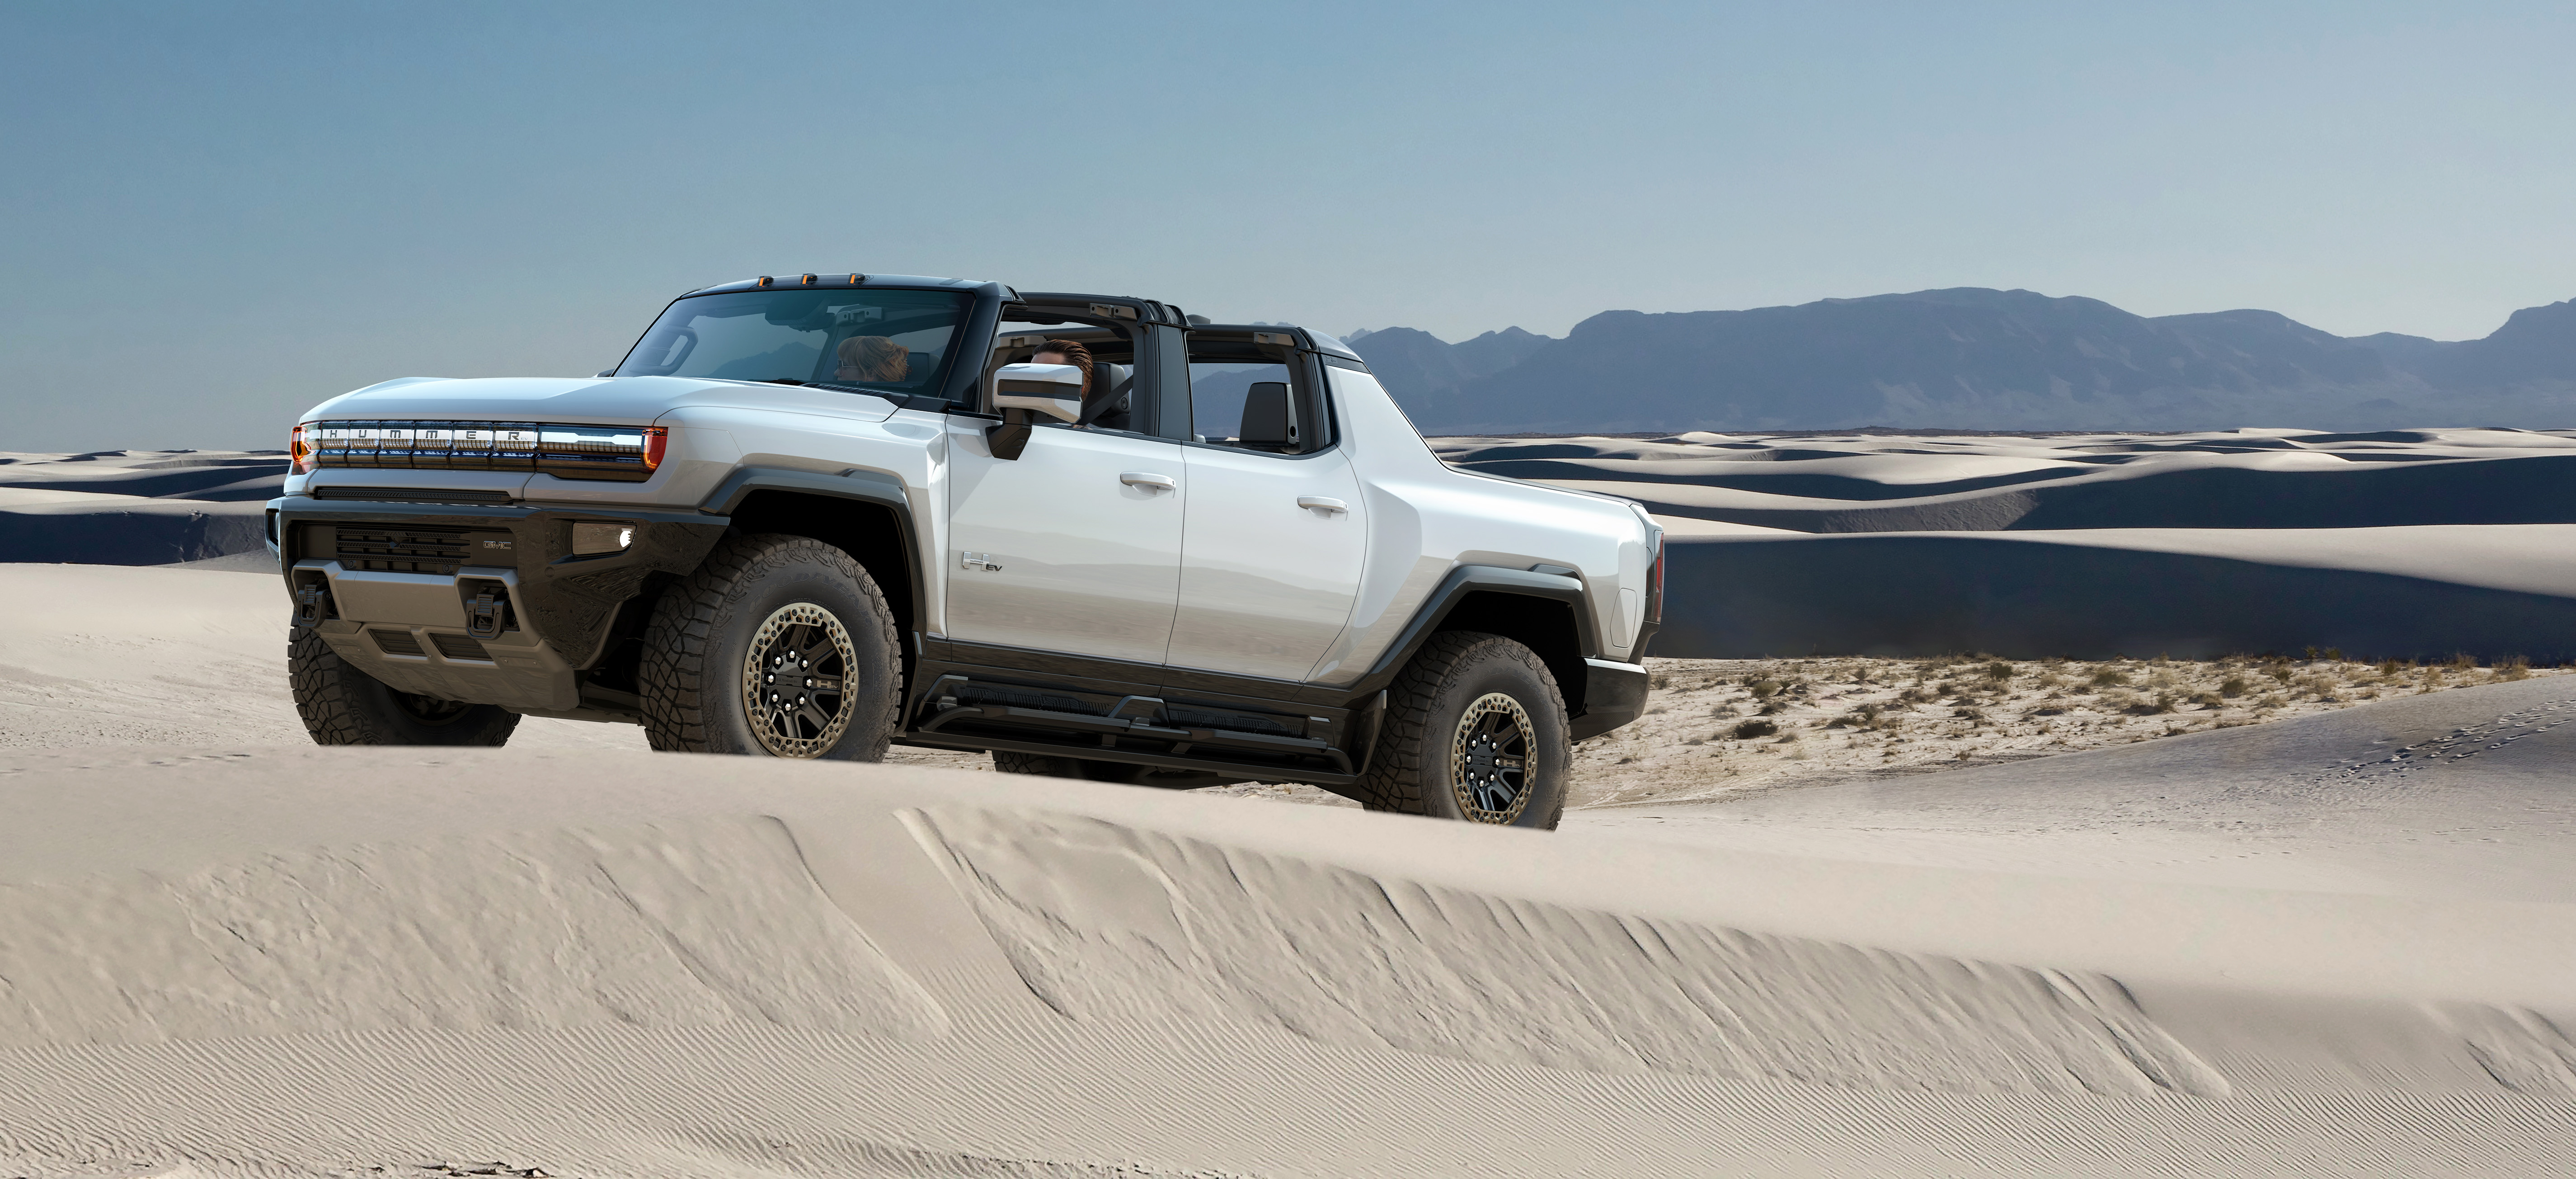 2022 GMC HUMMER EV Edition 1: Experience Just How Loud Quiet Can Be